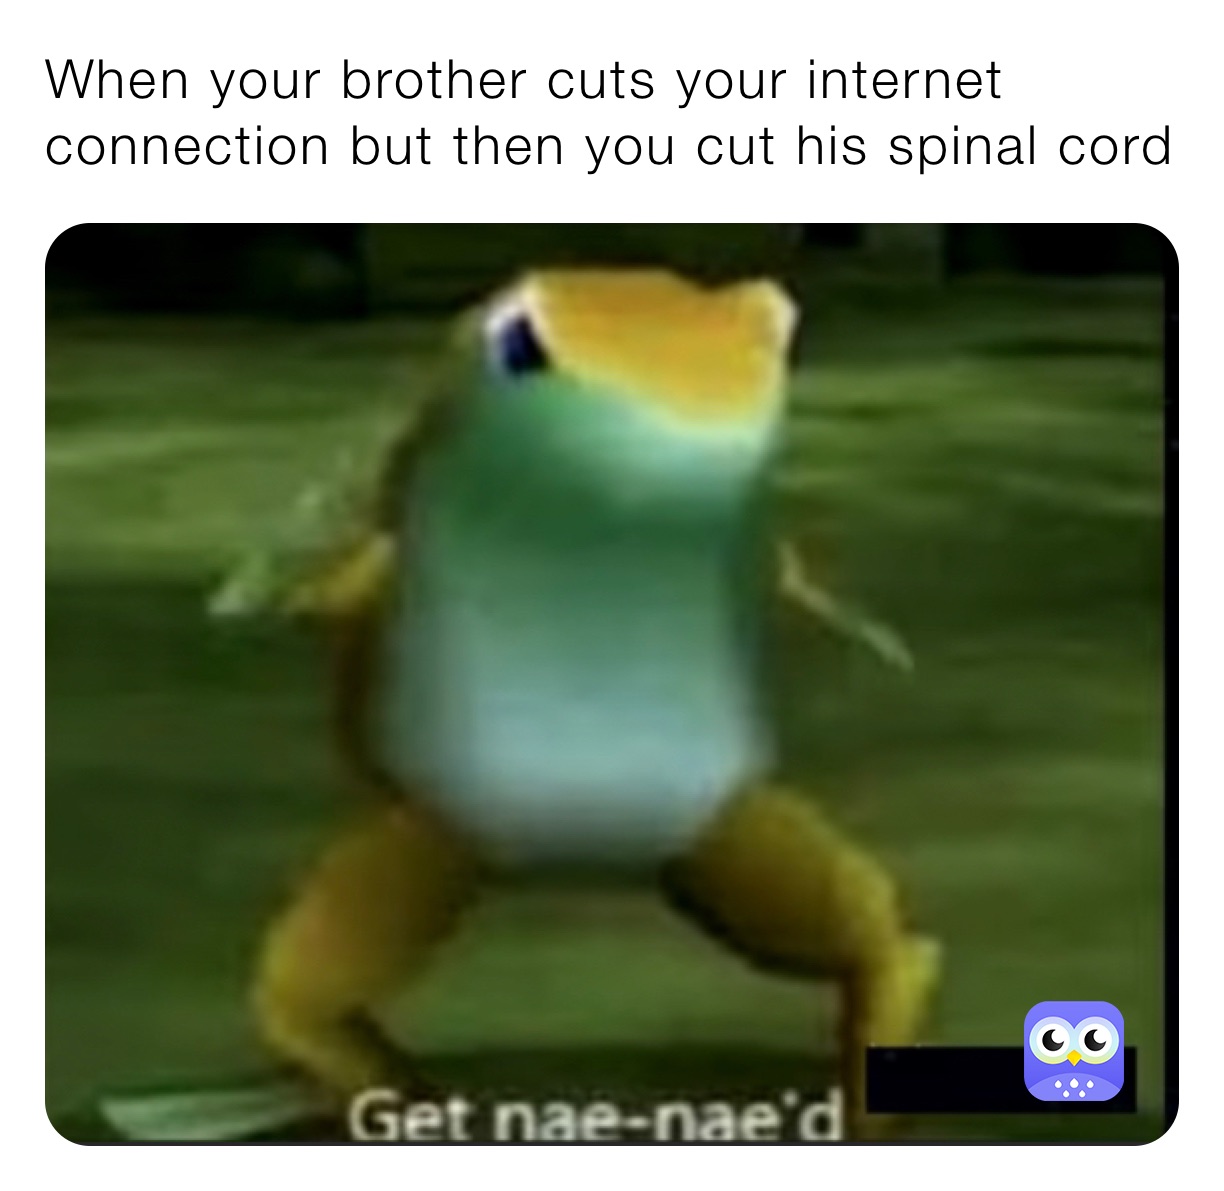 When your brother cuts your internet connection but then you cut his spinal cord